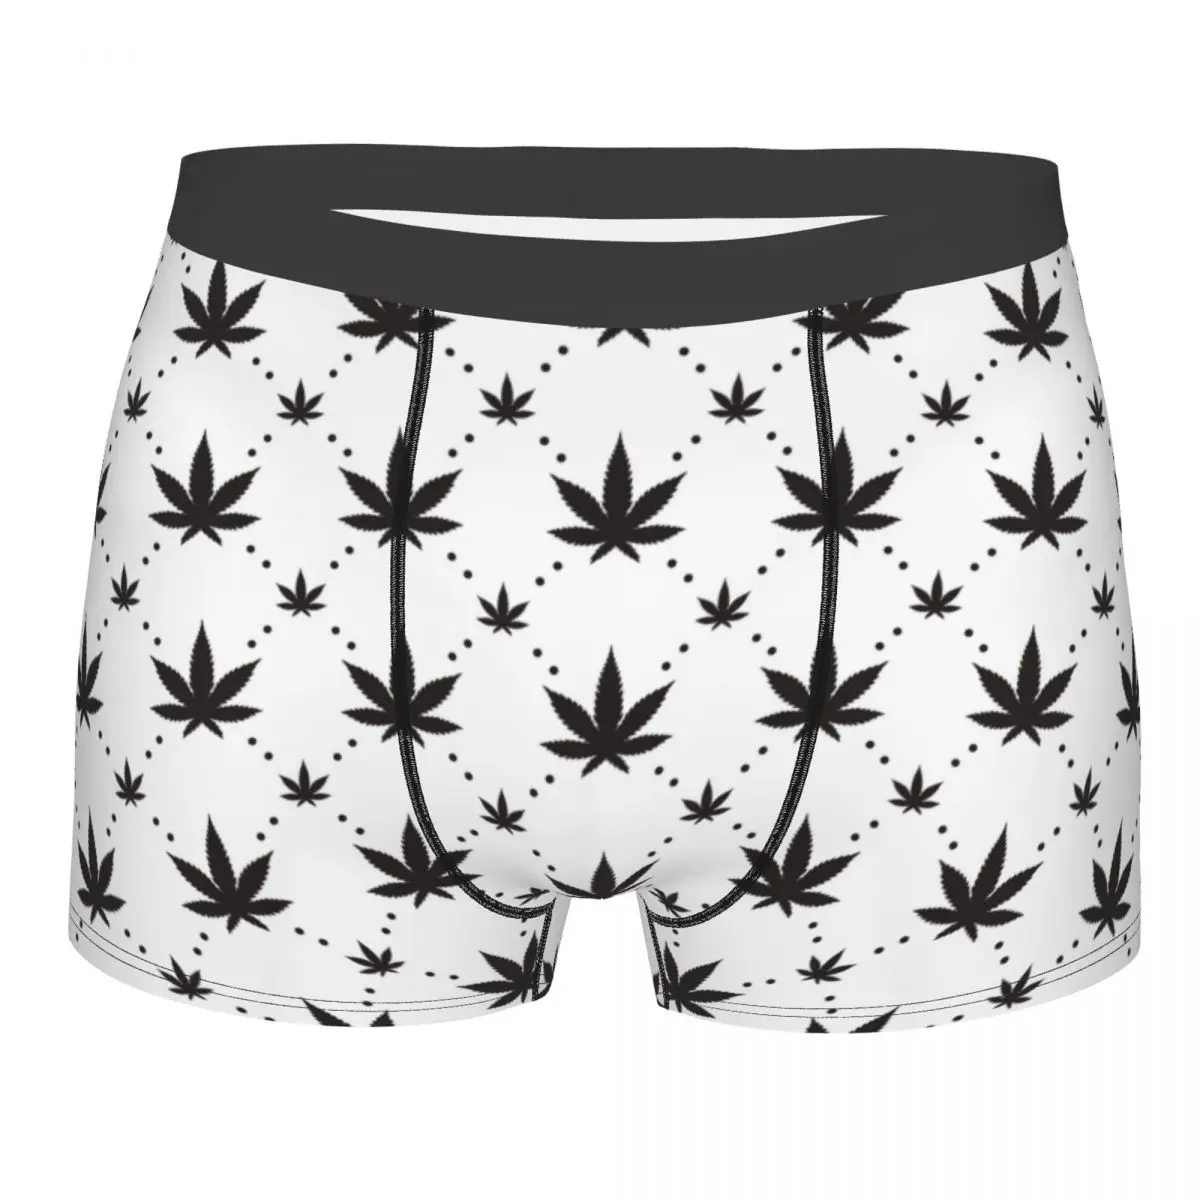 

Cannabis Leaf Men's Underwear Marijuana Weed Retro Style Boxer Briefs Shorts Panties Novelty Polyester Underpants for Male S-XXL